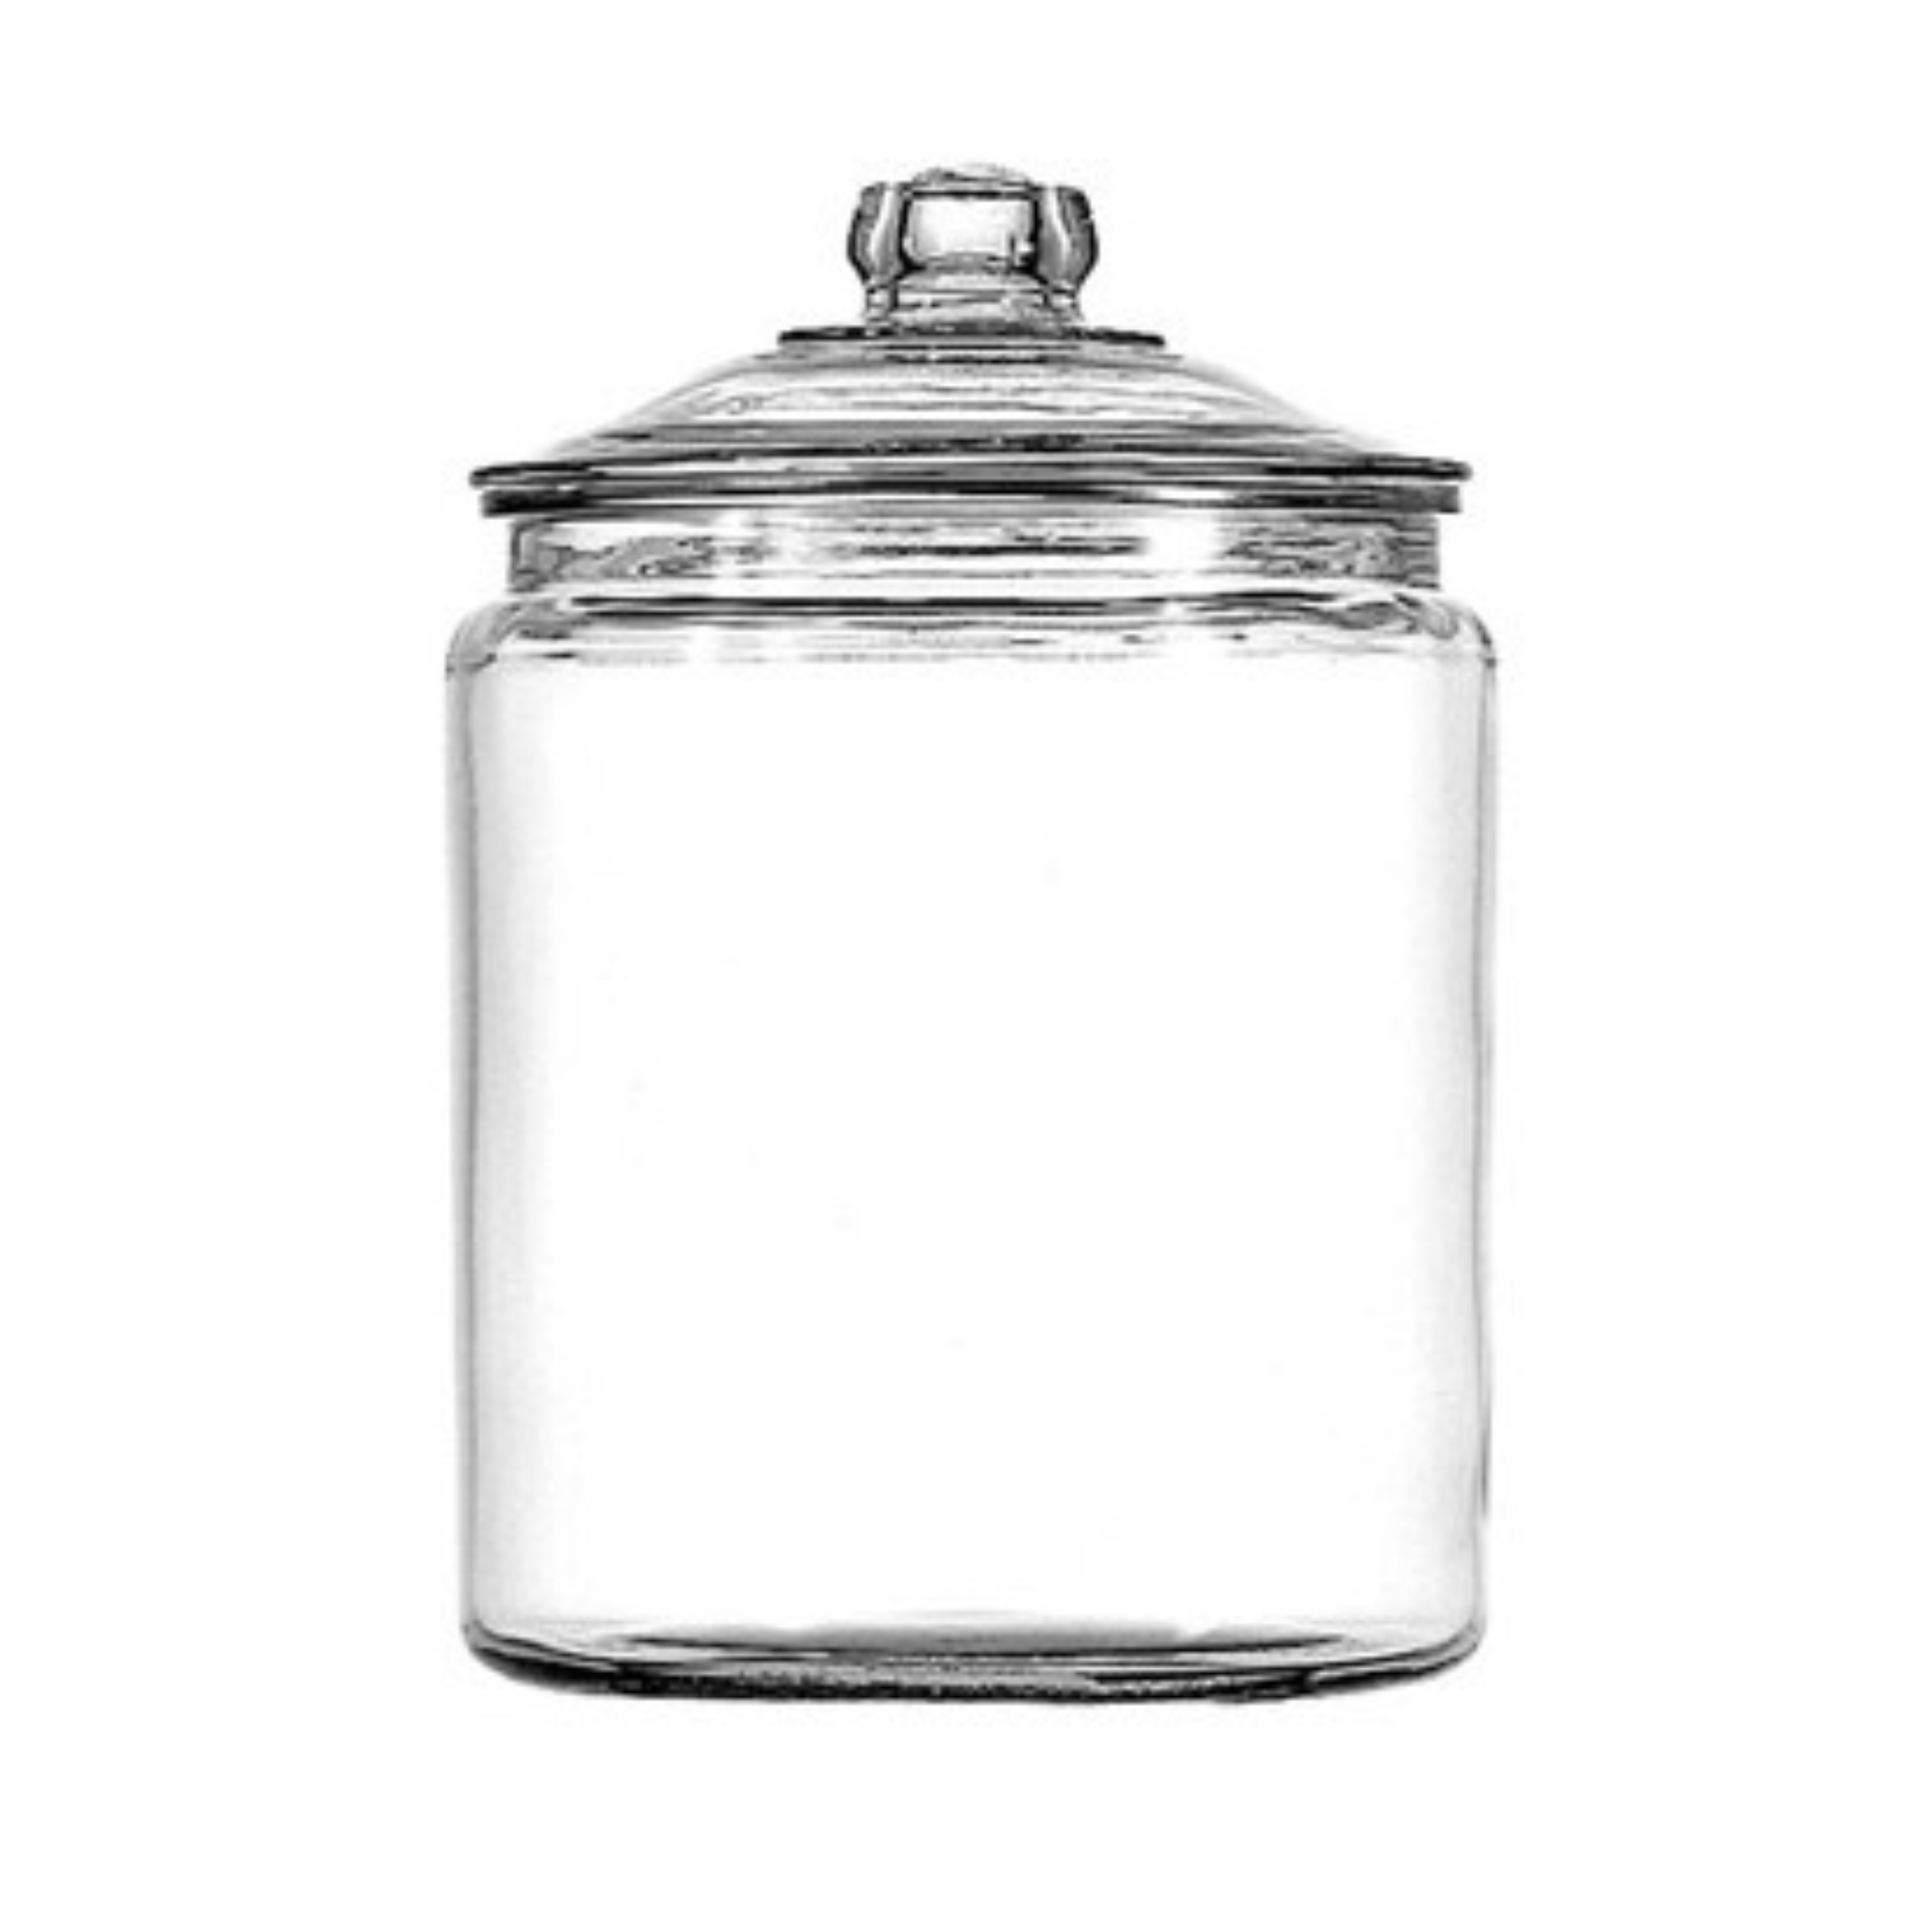 Anchor Hocking Heritage Hill Glass Jar with Lid, 1/2 Gallon - image 1 of 7